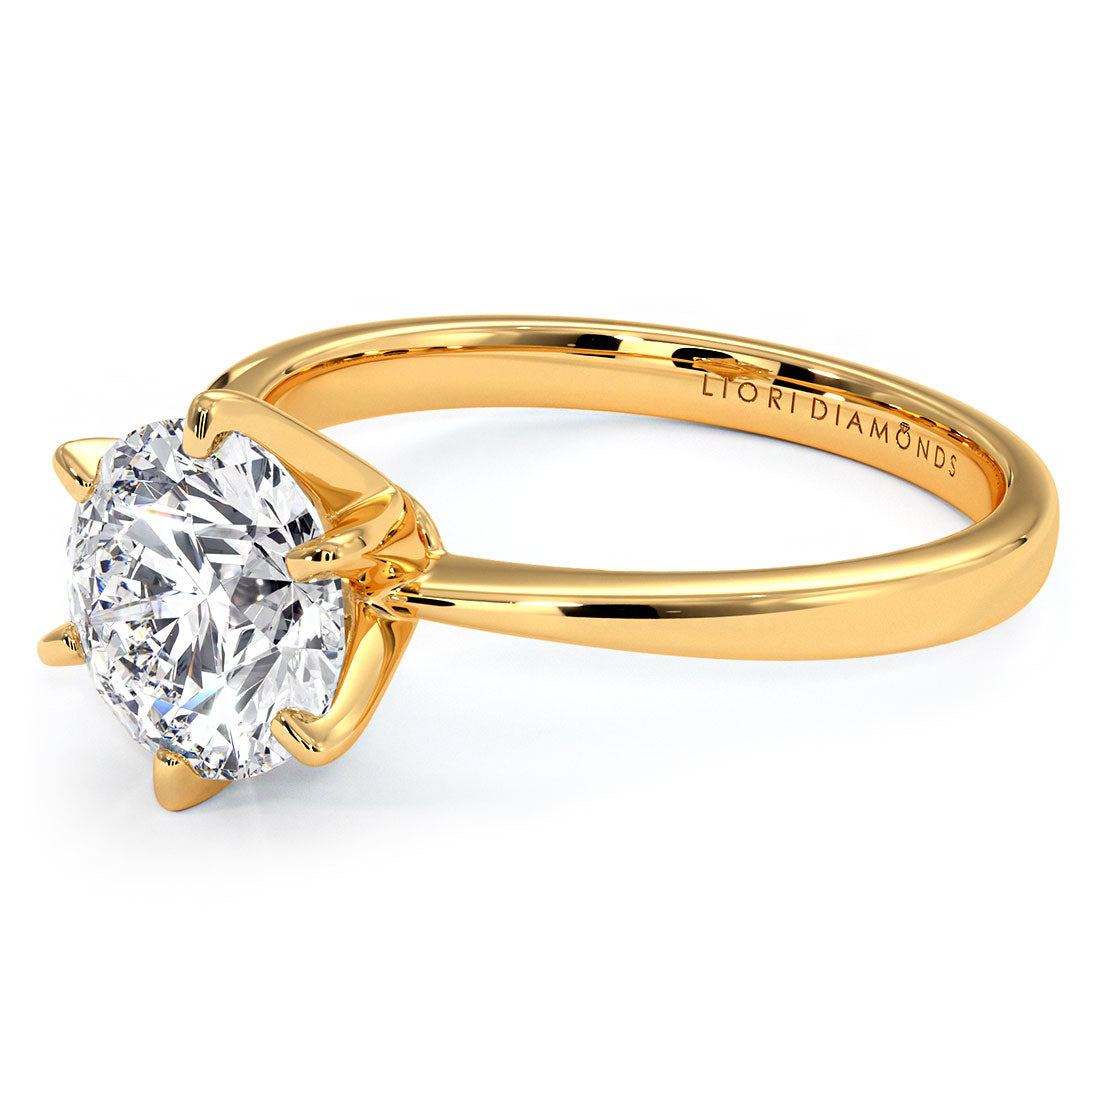 1.51ct GIA Certified Round Brilliant Petite Tapered 6 Prong Solitaire Lab Grown Diamond Engagement Ring set in 14k Yellow Gold